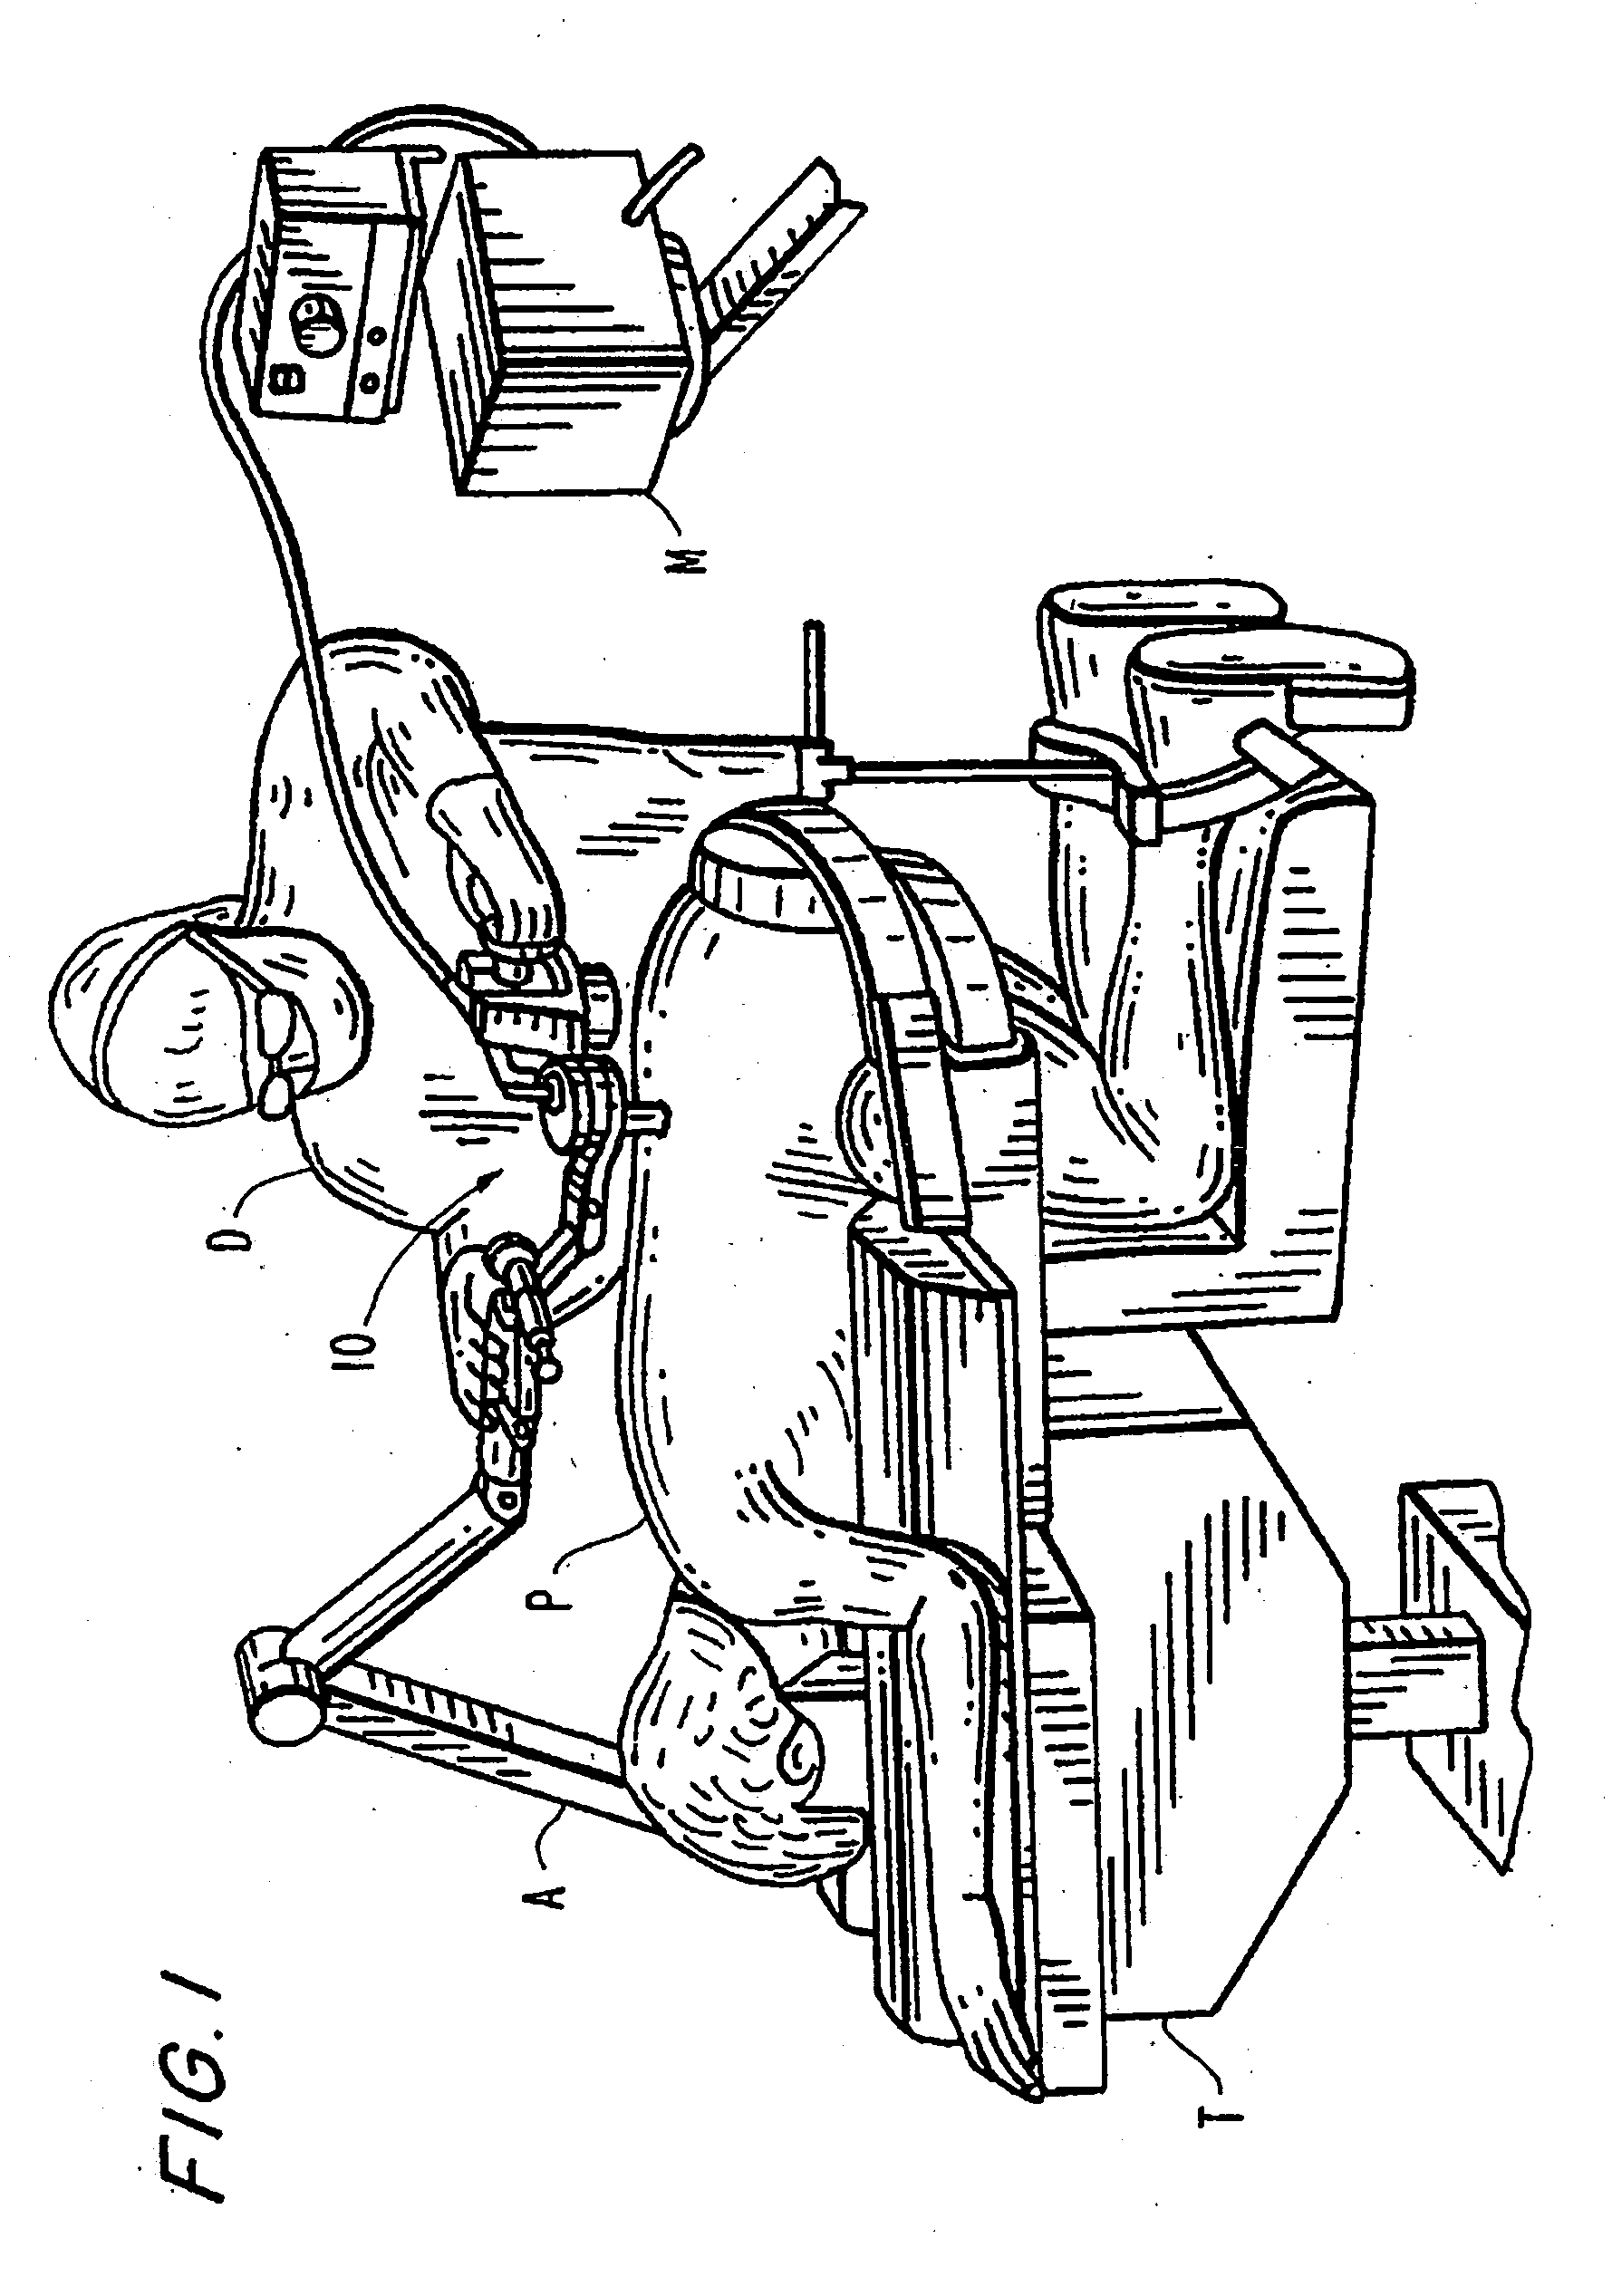 Methods and apparatuses for treating the spine through an access device